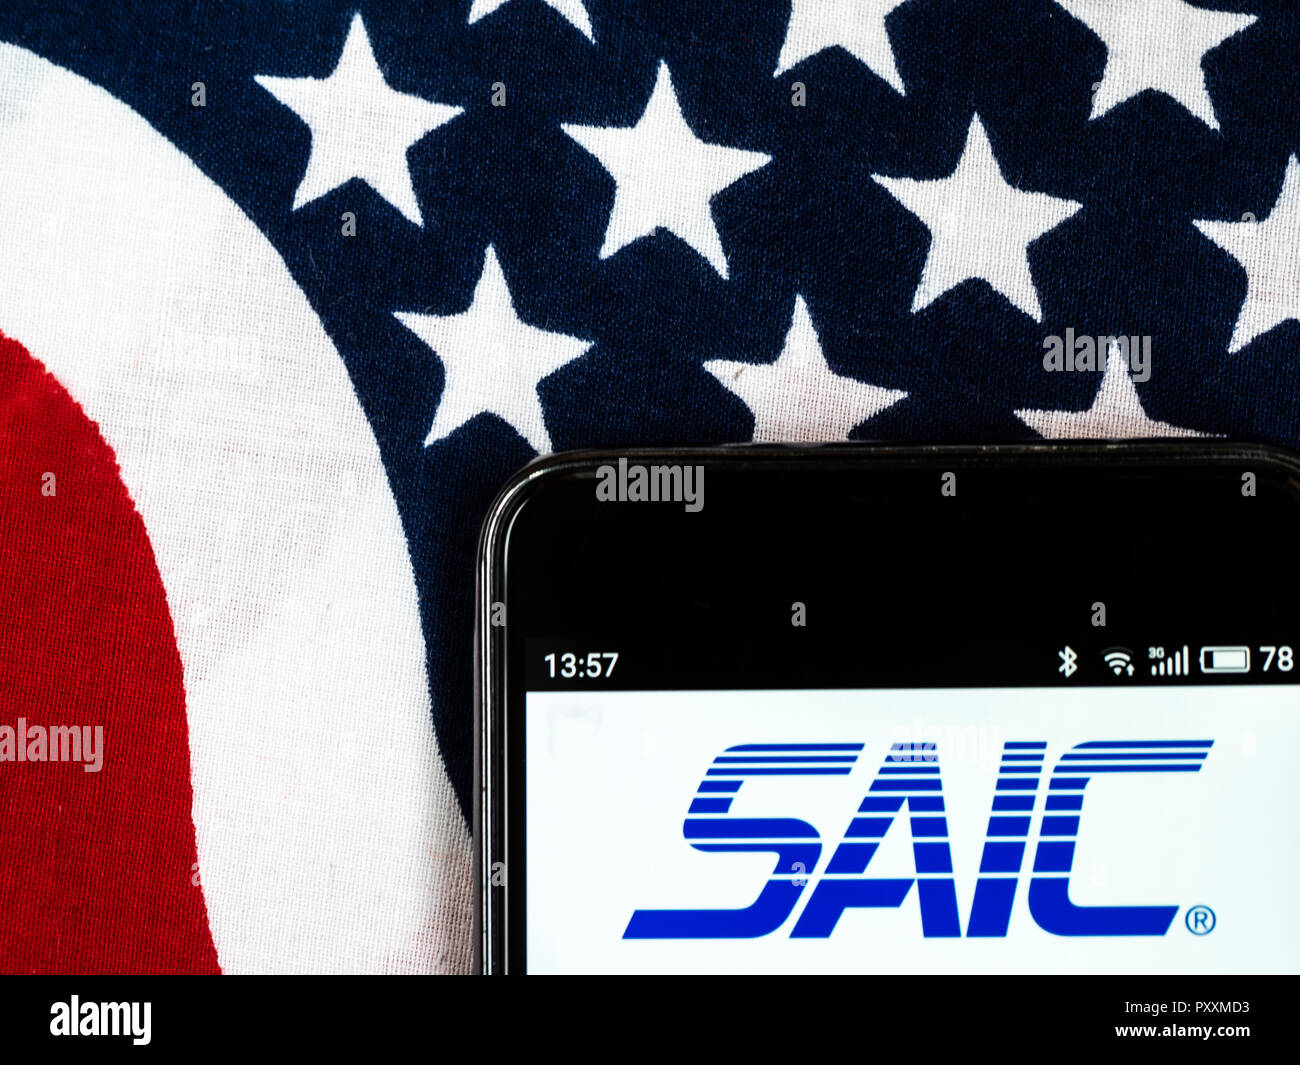 Science Applications International Corporation (SAIC)  logo seen displayed on smart phone.. Science Applications International Corporation provides government services and information technology support. Stock Photo